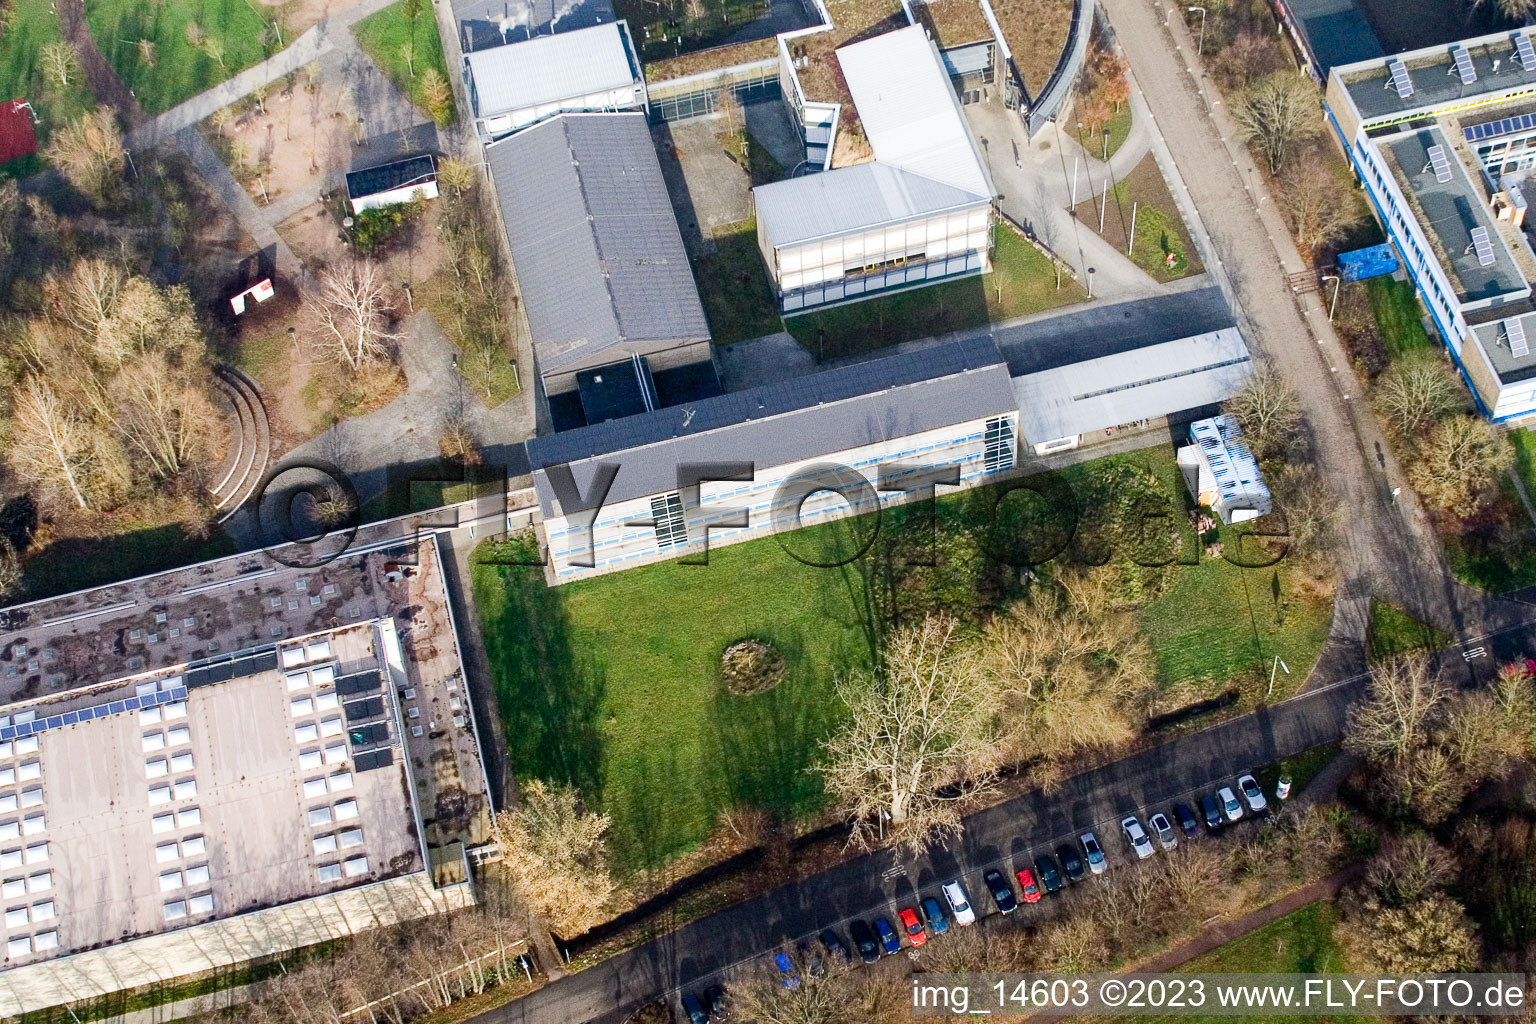 Aerial view of IGS school garden in Kandel in the state Rhineland-Palatinate, Germany